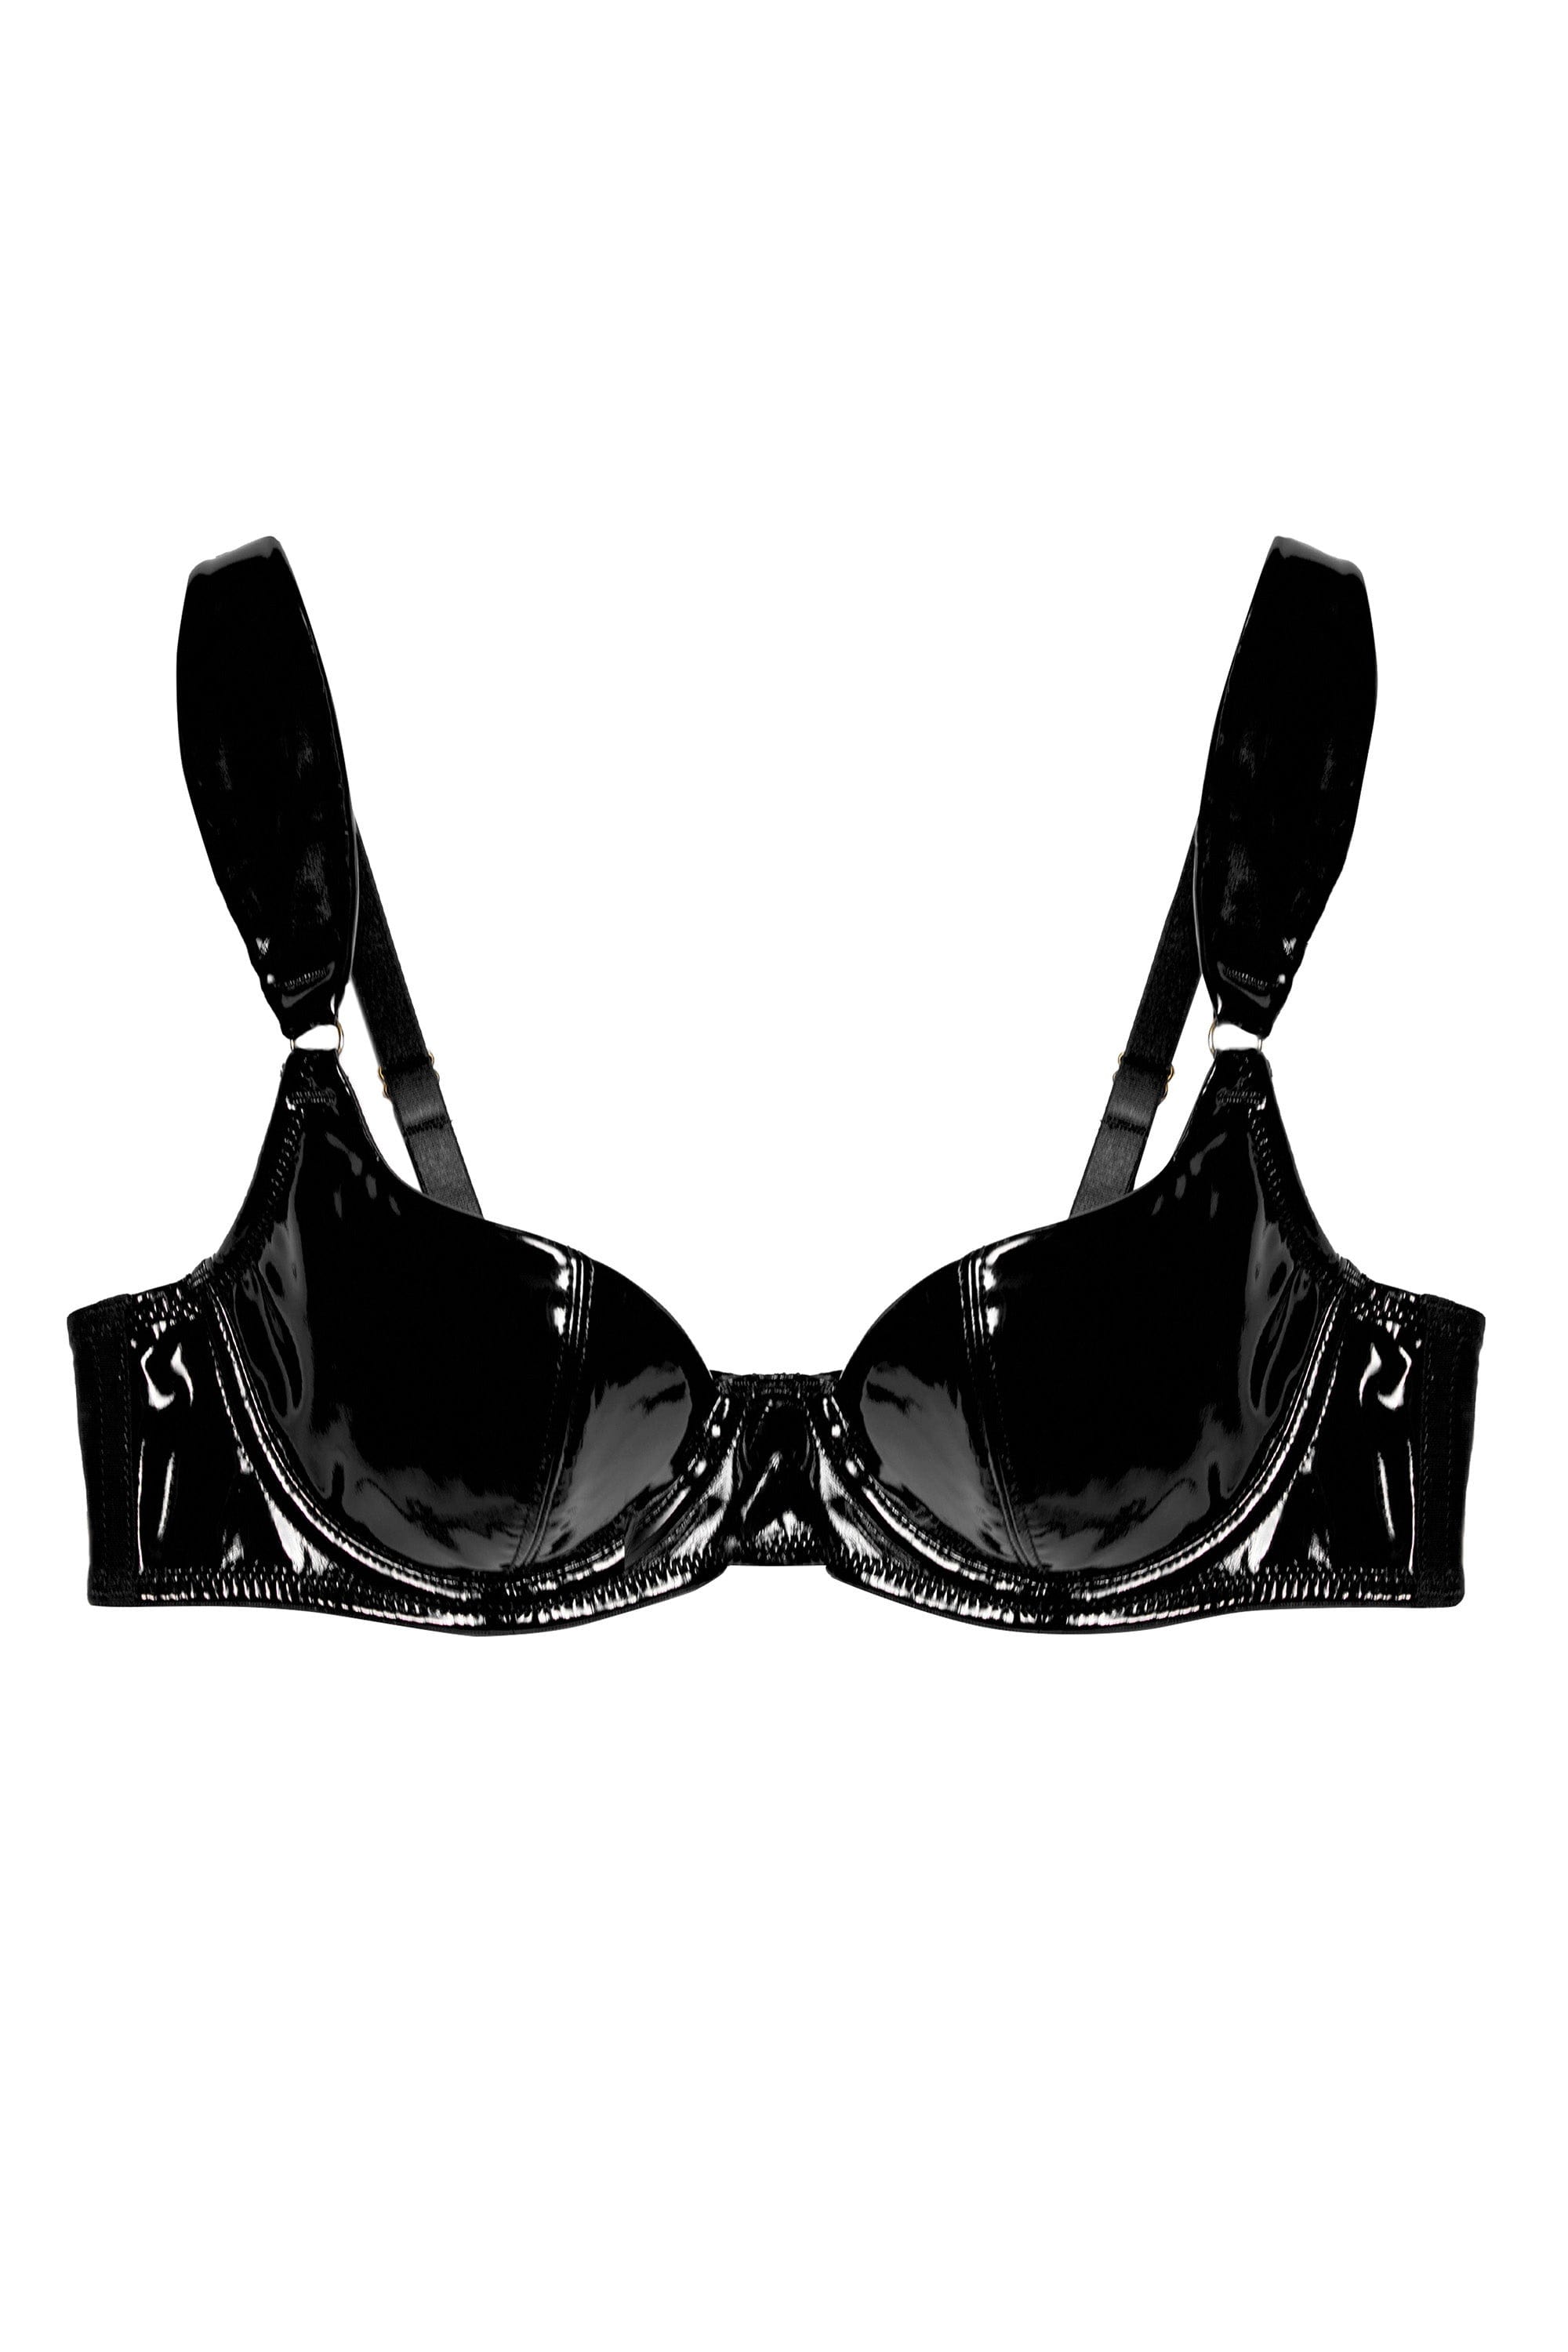 Maxine PVC Plunging Bra and Matching Panty Set by Hustler Lingerie X  Playful Promises – DareLingerie